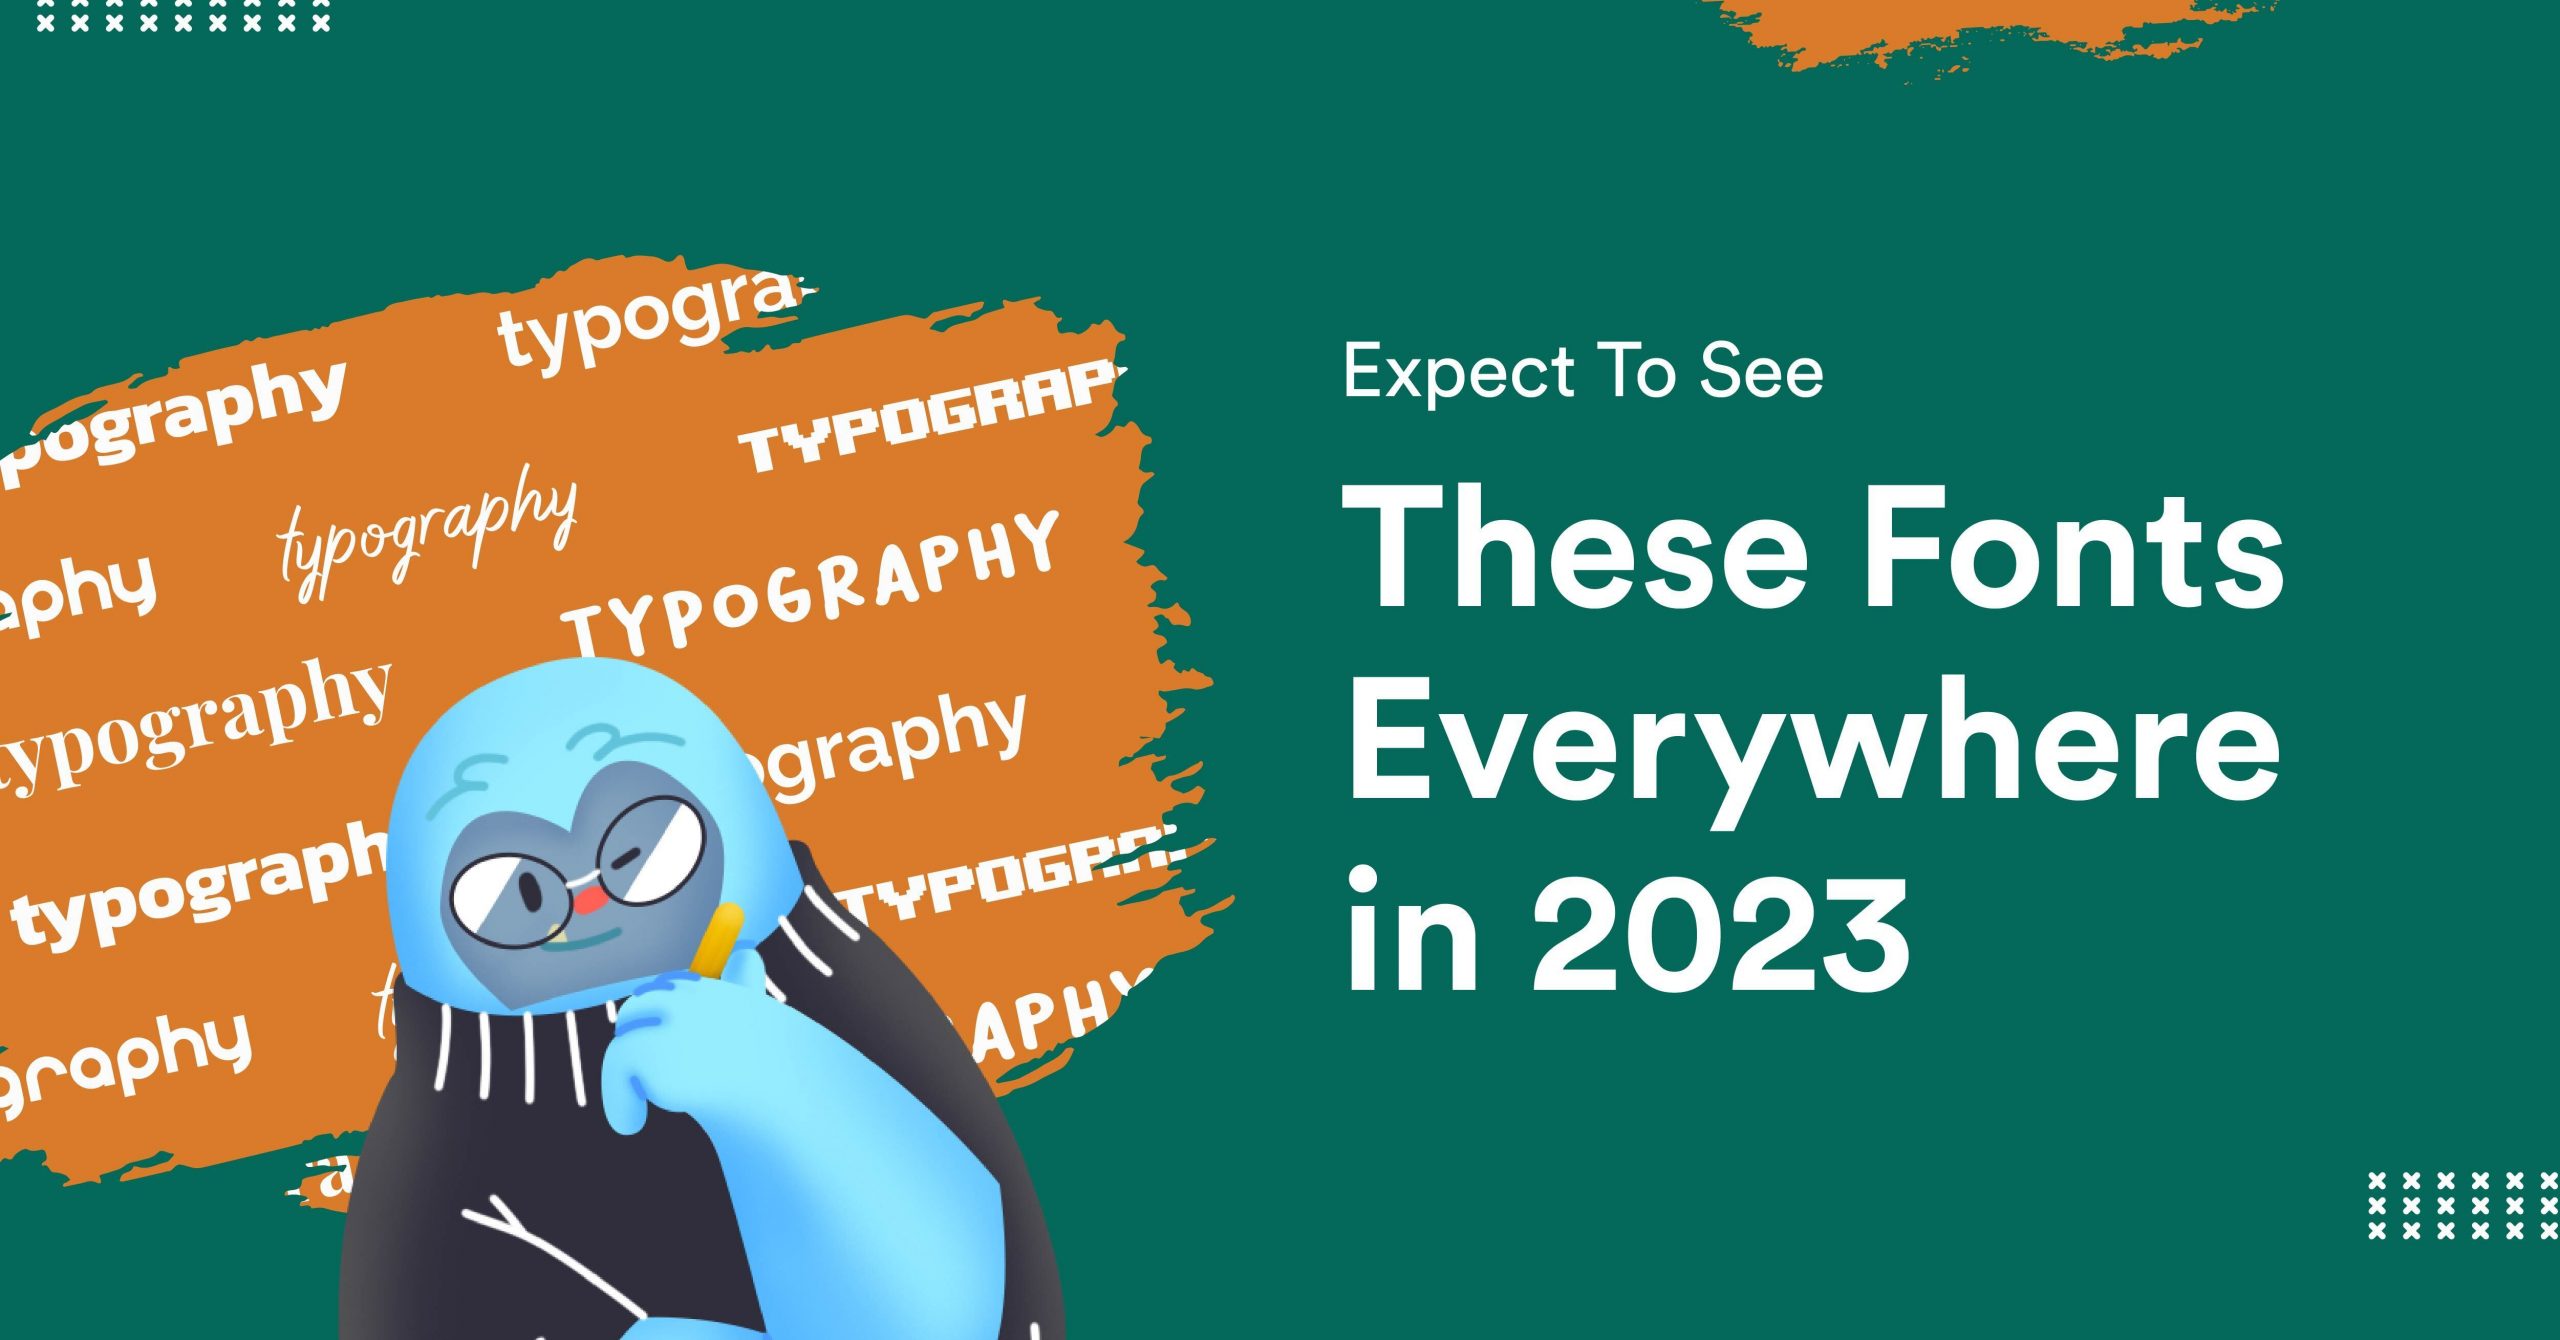 Expect To See These Top Fonts Everywhere in 2023